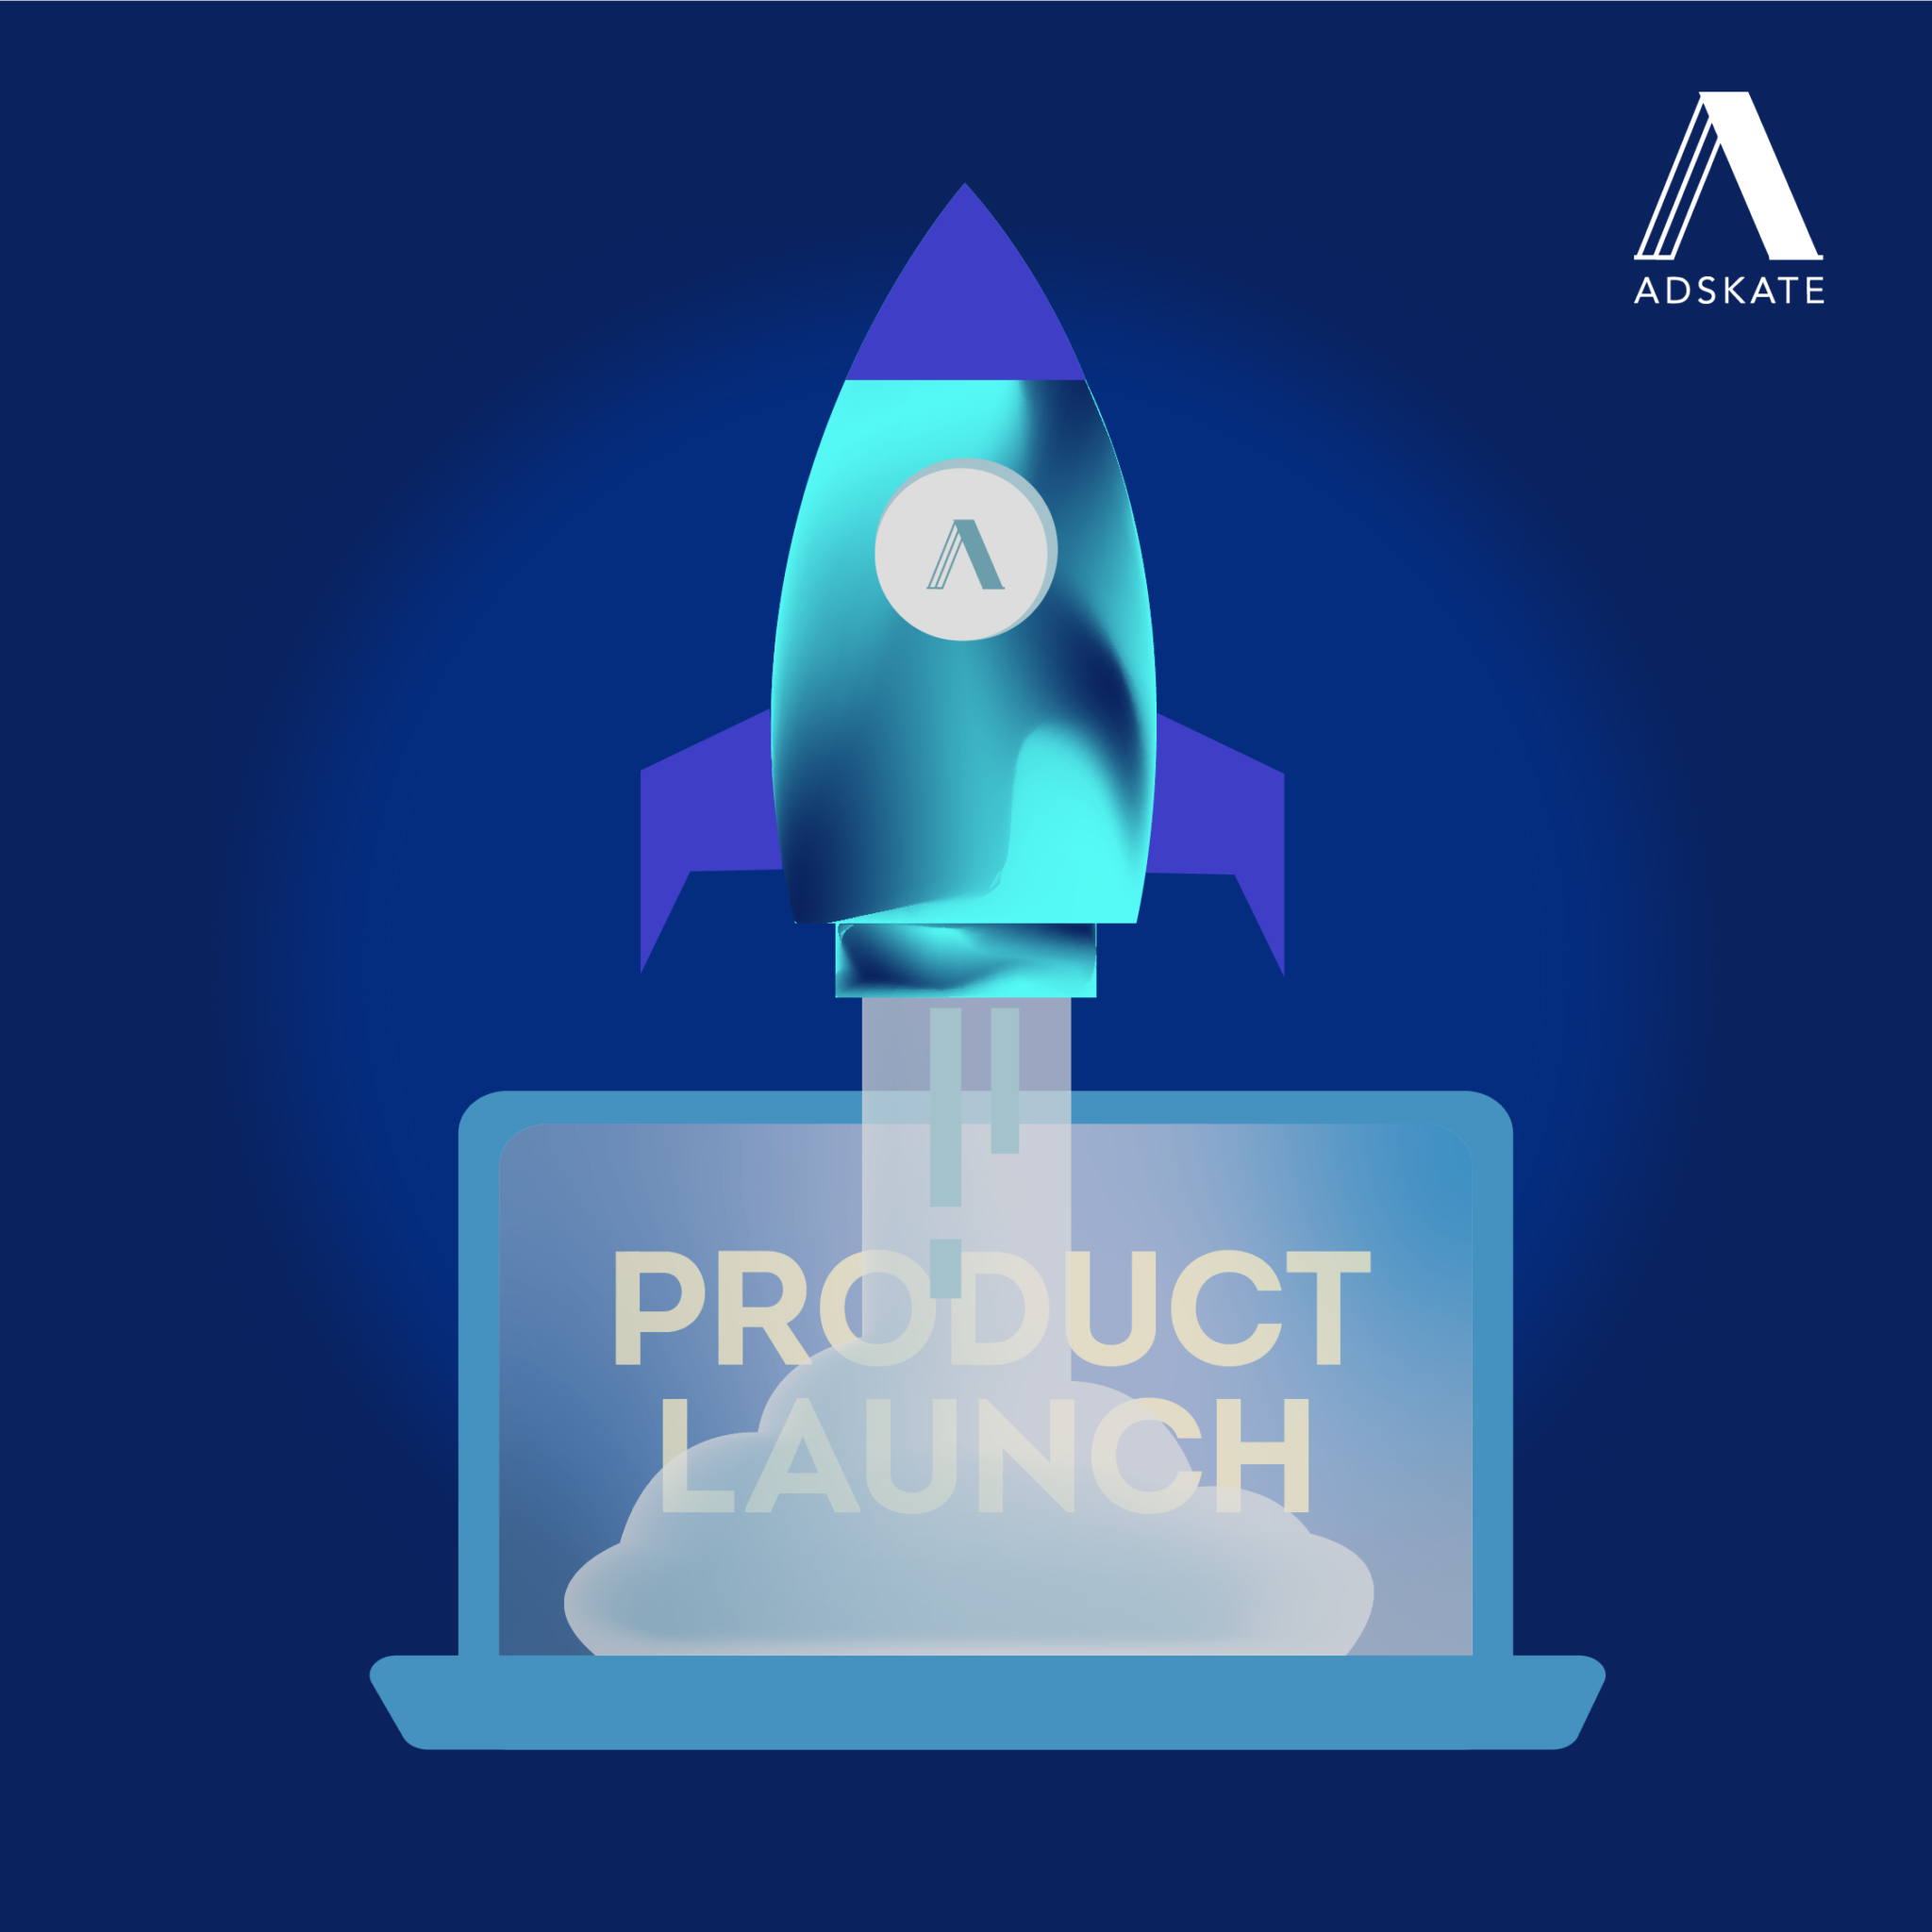 What is a PRoduct Launch?